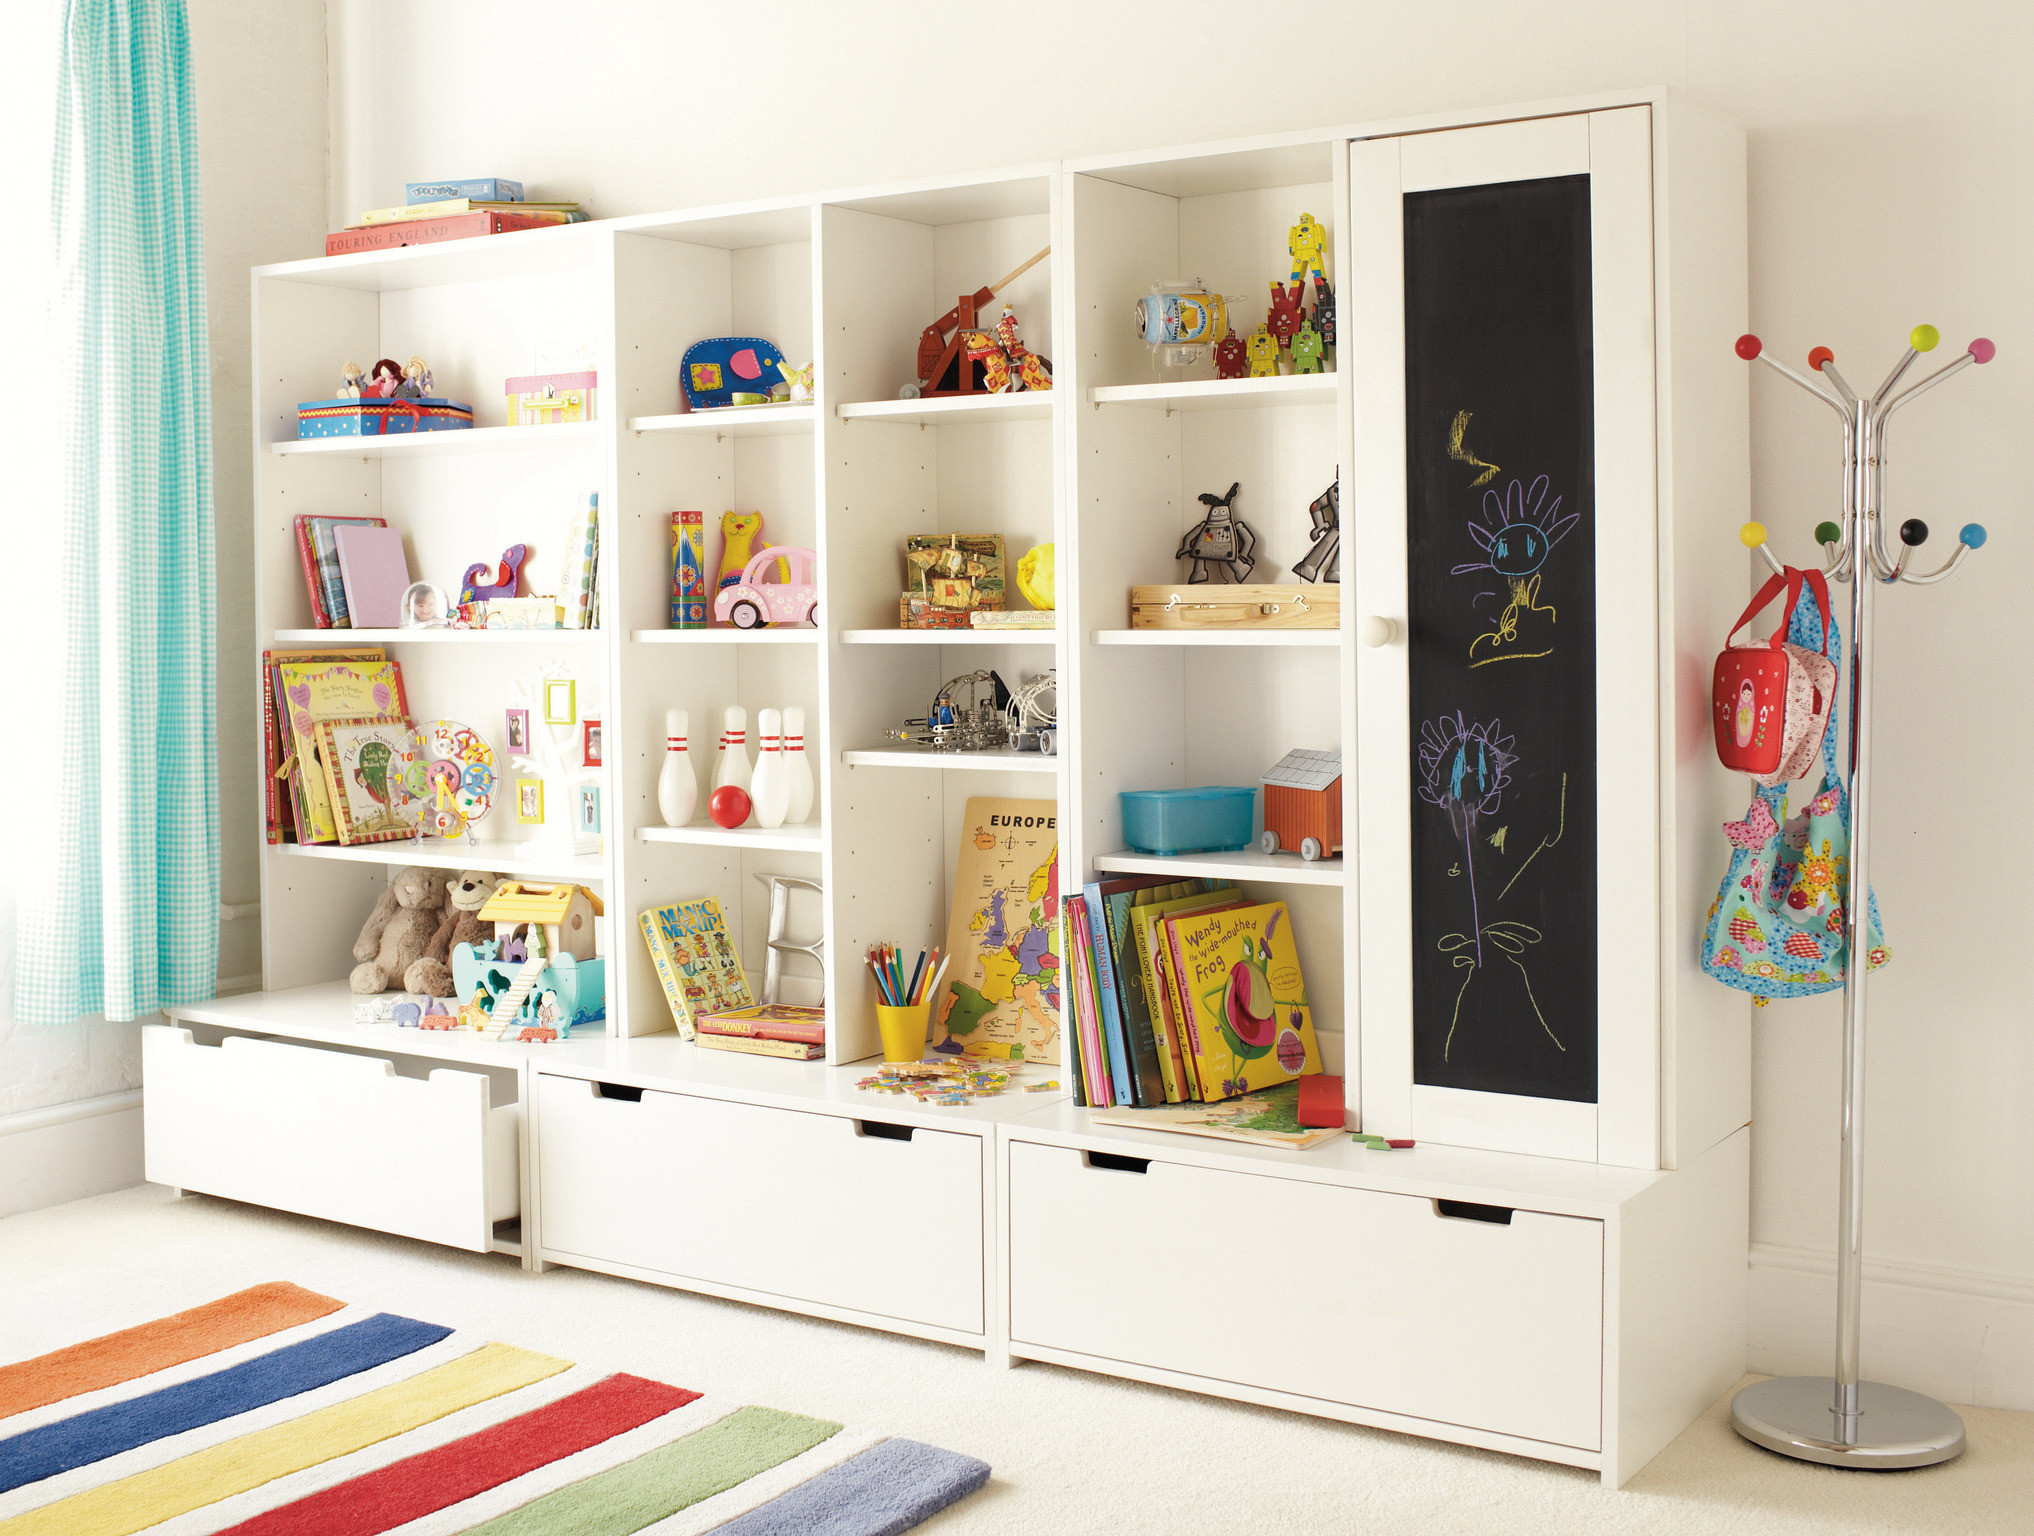 Shelving For Kids Room
 Most Precise Children’s Playroom Storage Ideas 42 Room